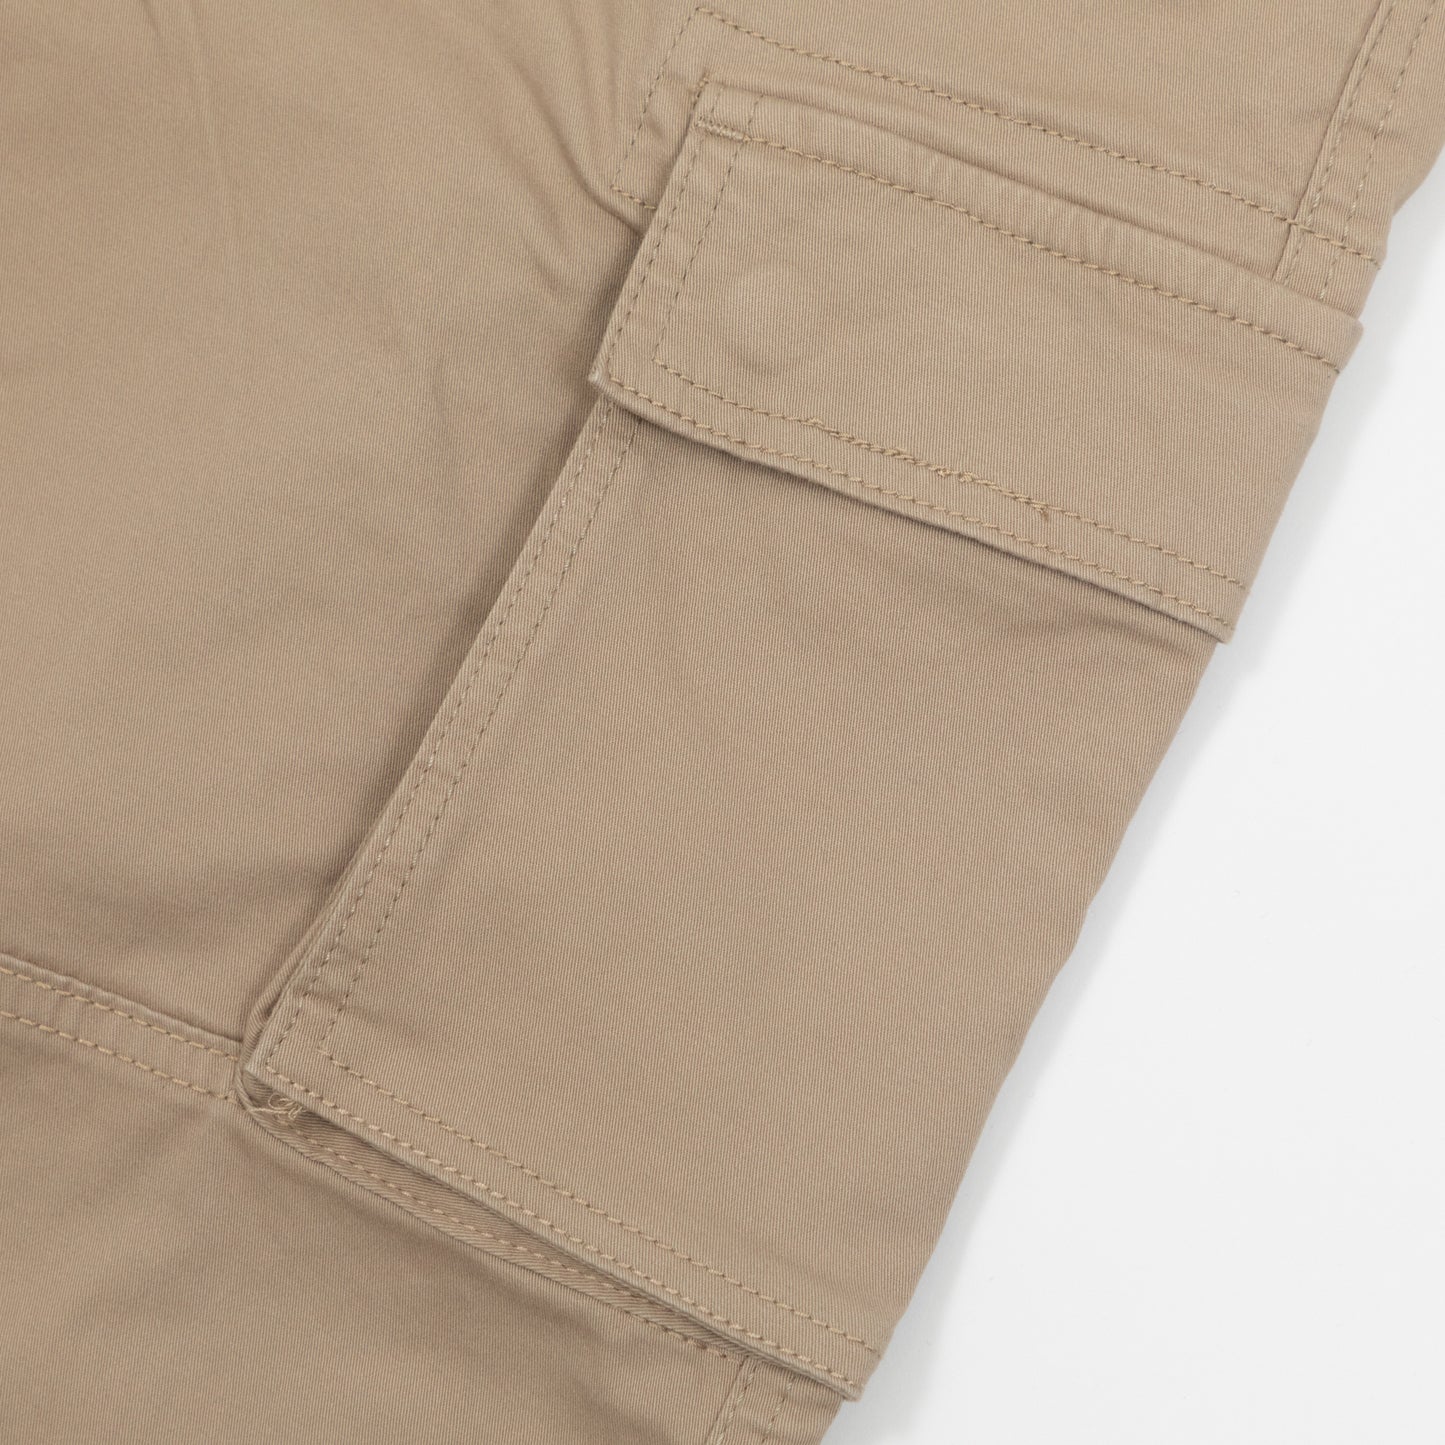 ONLY & SONS Cargo Pants in CHINCHILLA